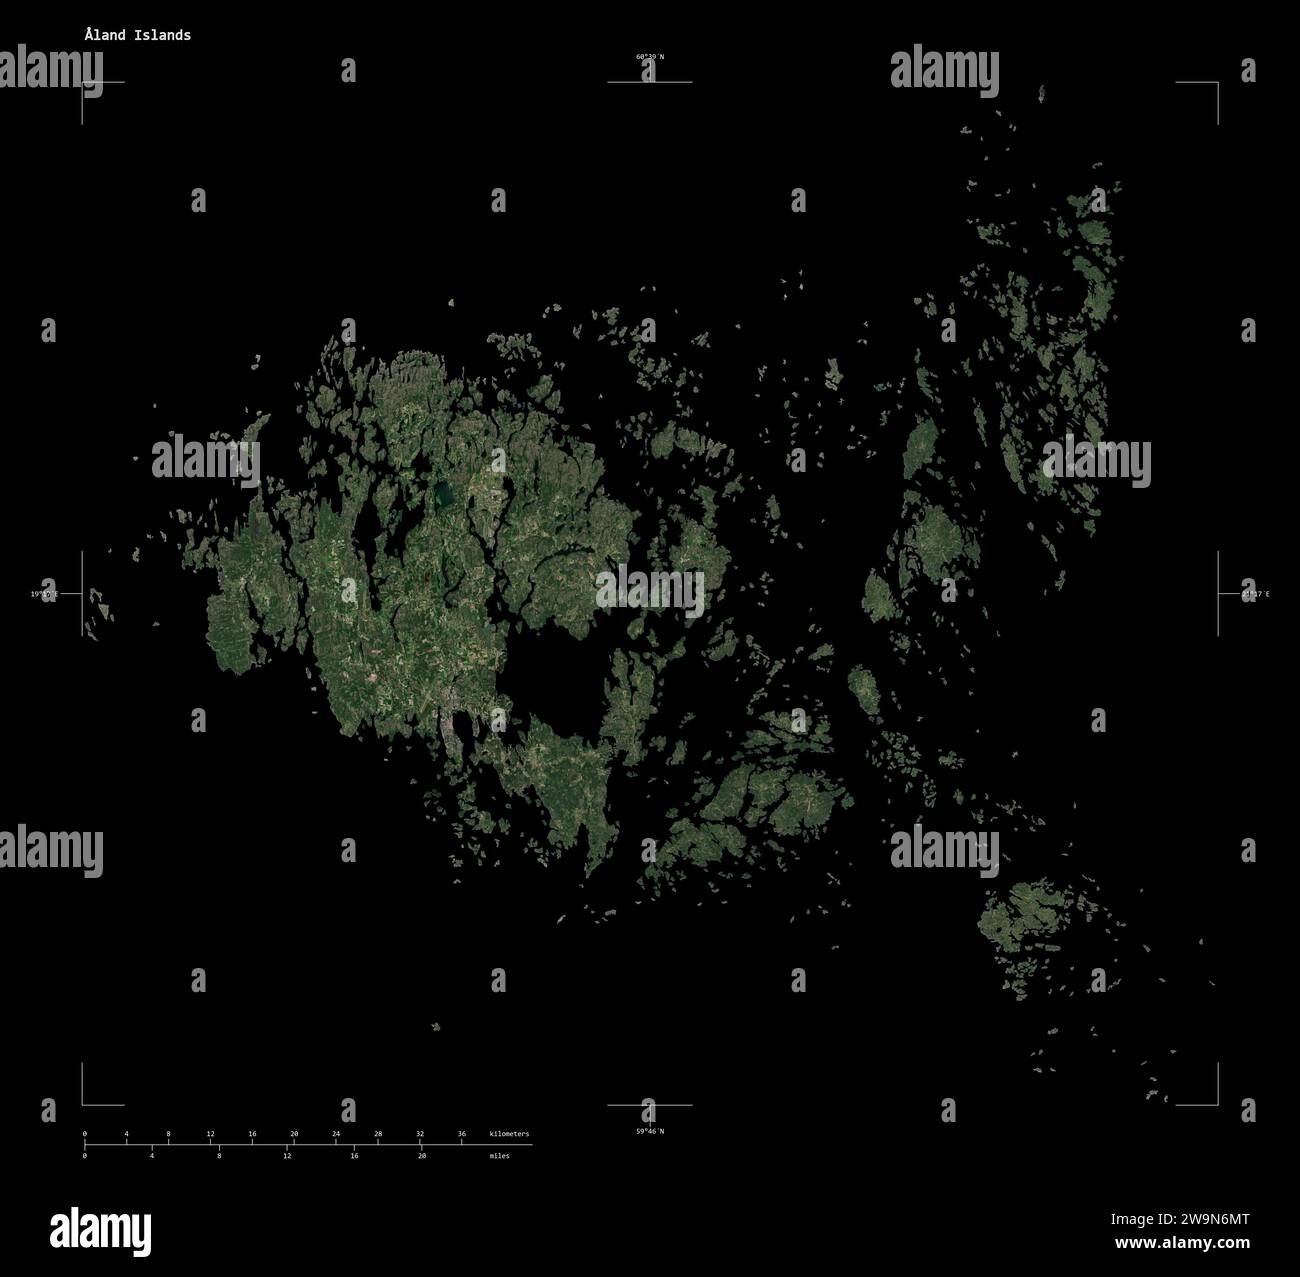 Shape of a low resolution satellite map of the Aland Islands, with distance scale and map border coordinates, isolated on black Stock Photo